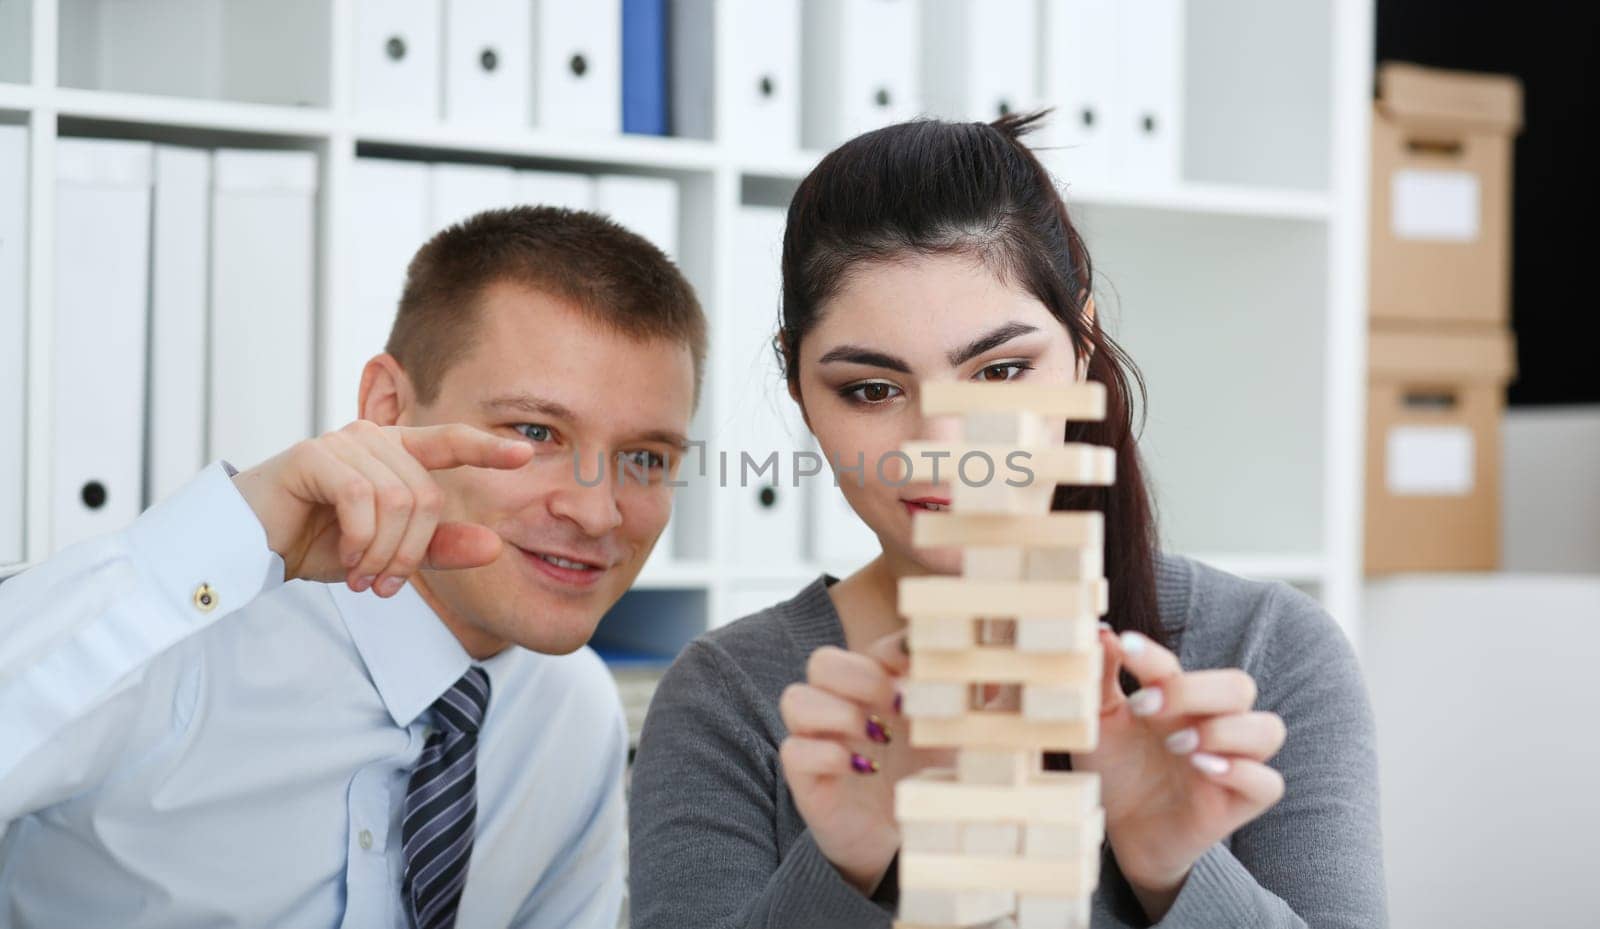 Businessman and businesswoman plays in strategy hand rearranging wooden blocks involved during break at work in office sitting table gaming pile fun joy pastime concept.